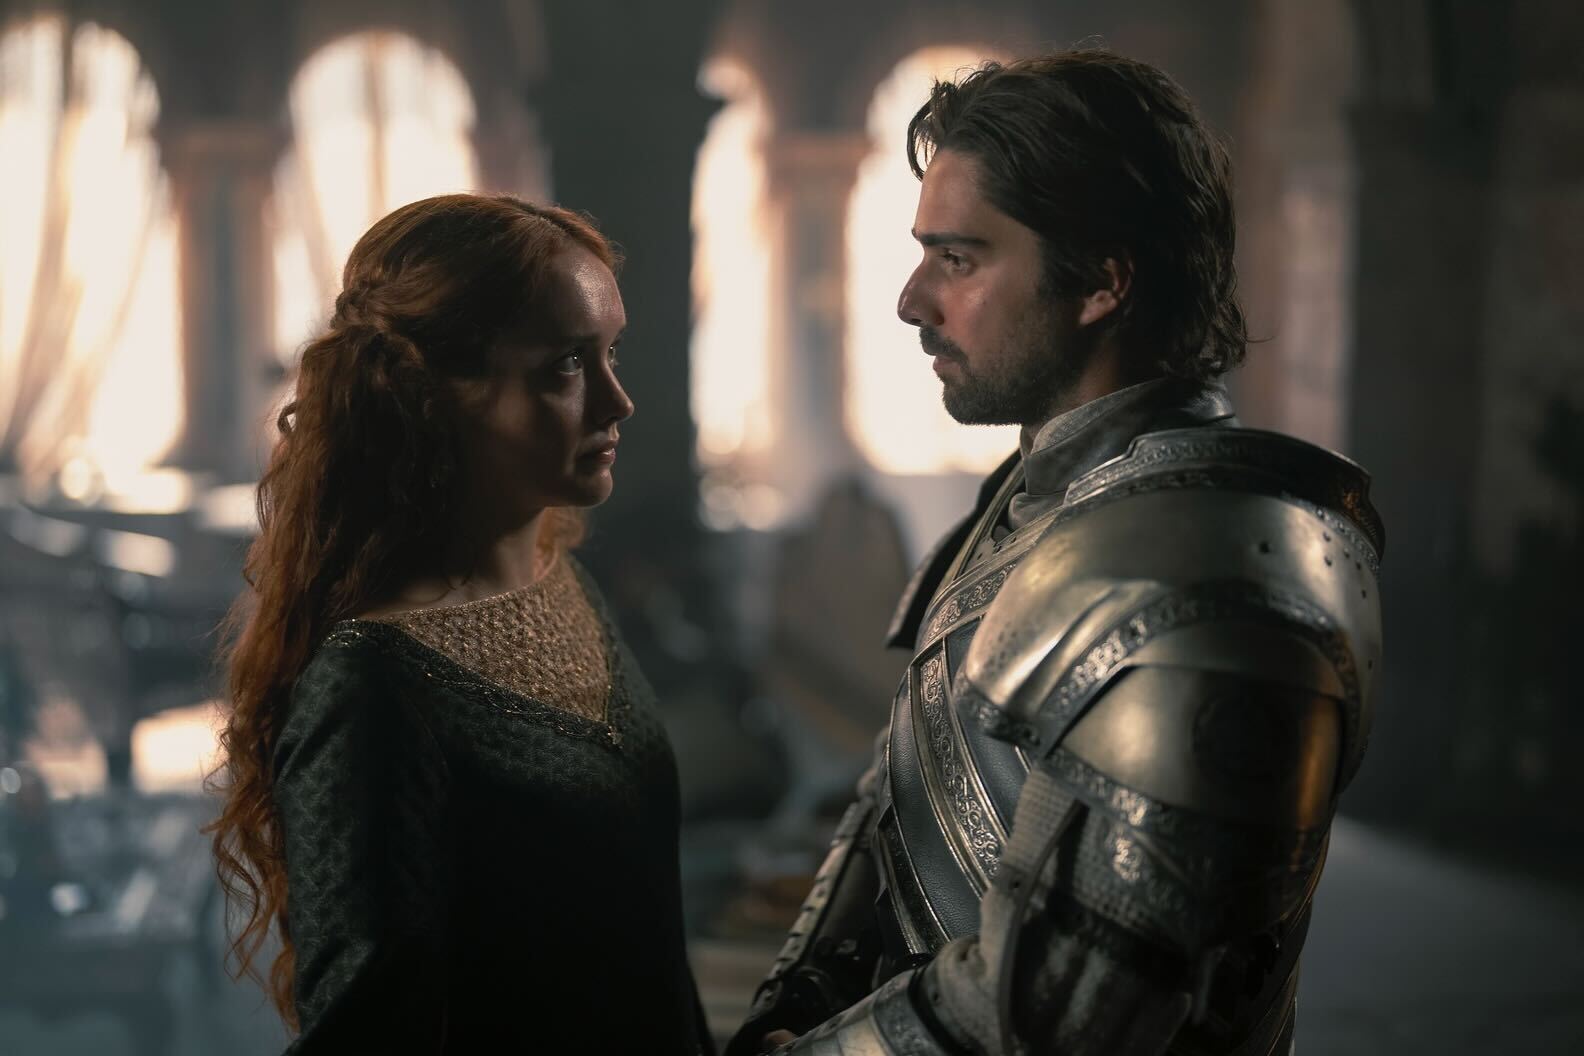 Olivia Cooke as Alicent Hightower and Fabien Frankel as Ser Criston Cole in George R R Martin and Ryan Condal's HBO action adventure fantasy drama television adaptation, House of the Dragon, Season 2 Episode 1